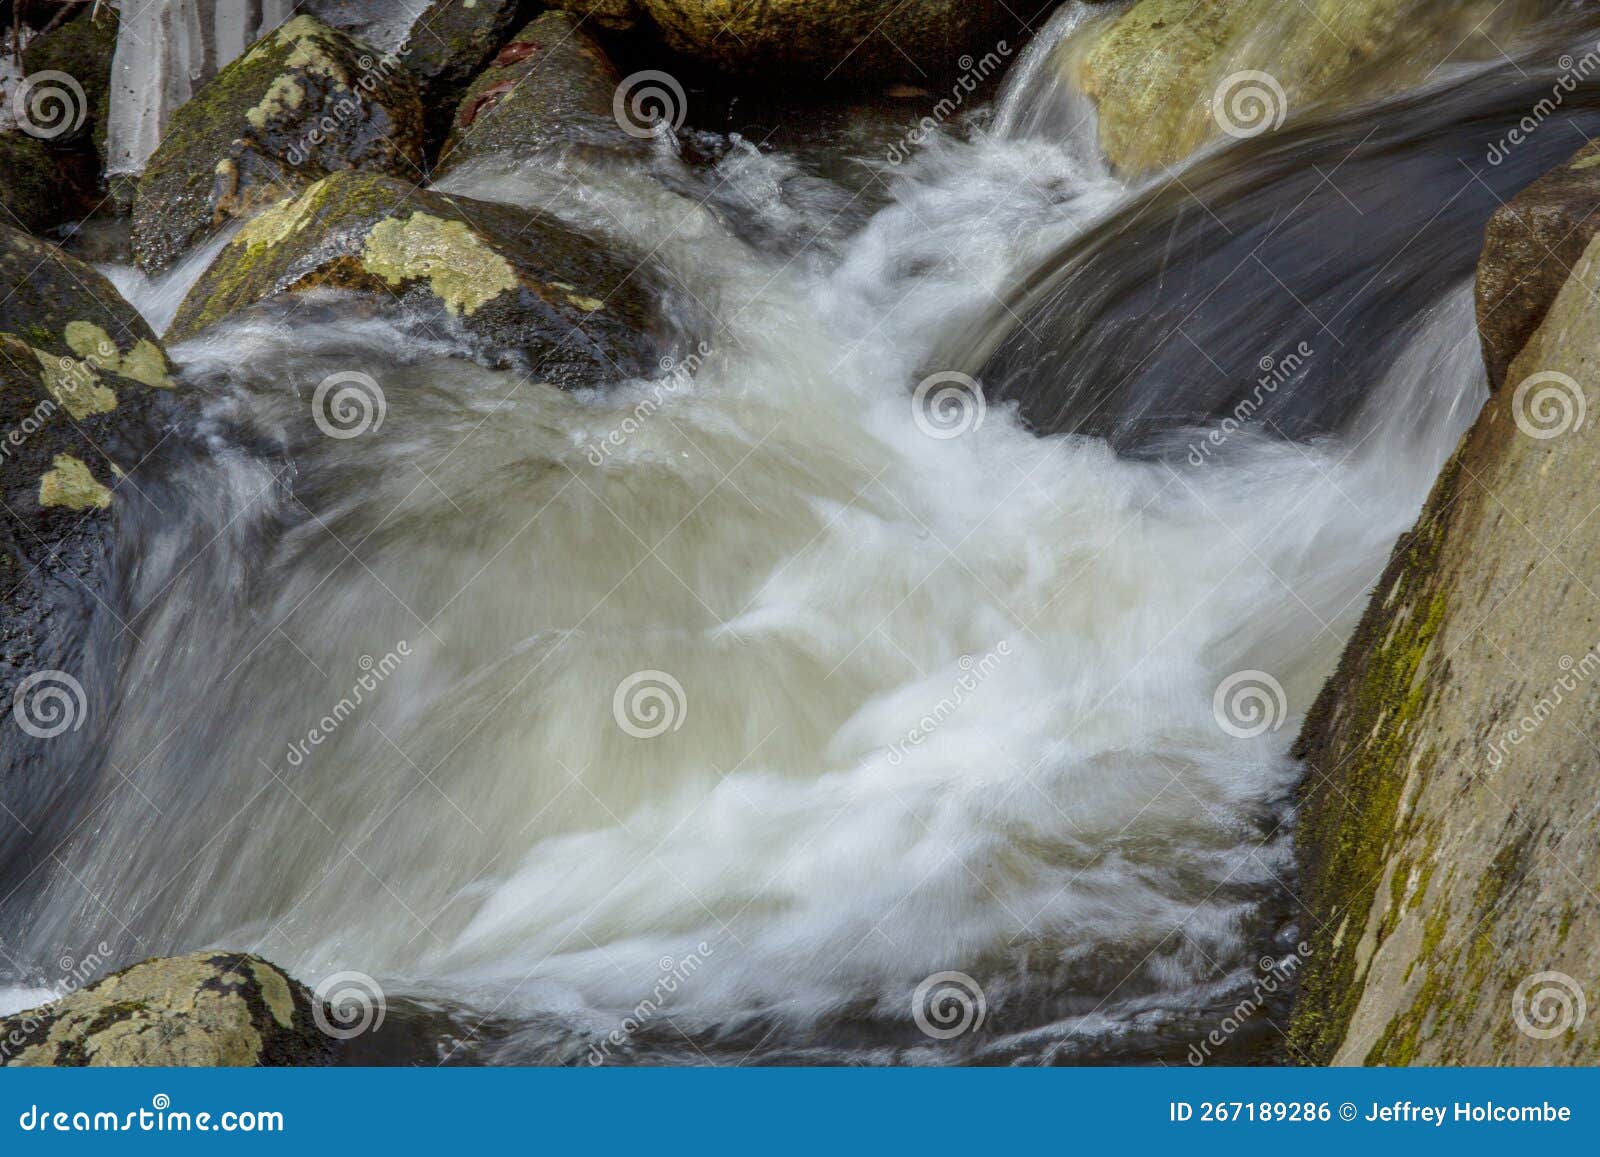 rushing-water-at-temple-brook-conservation-area-in-monson